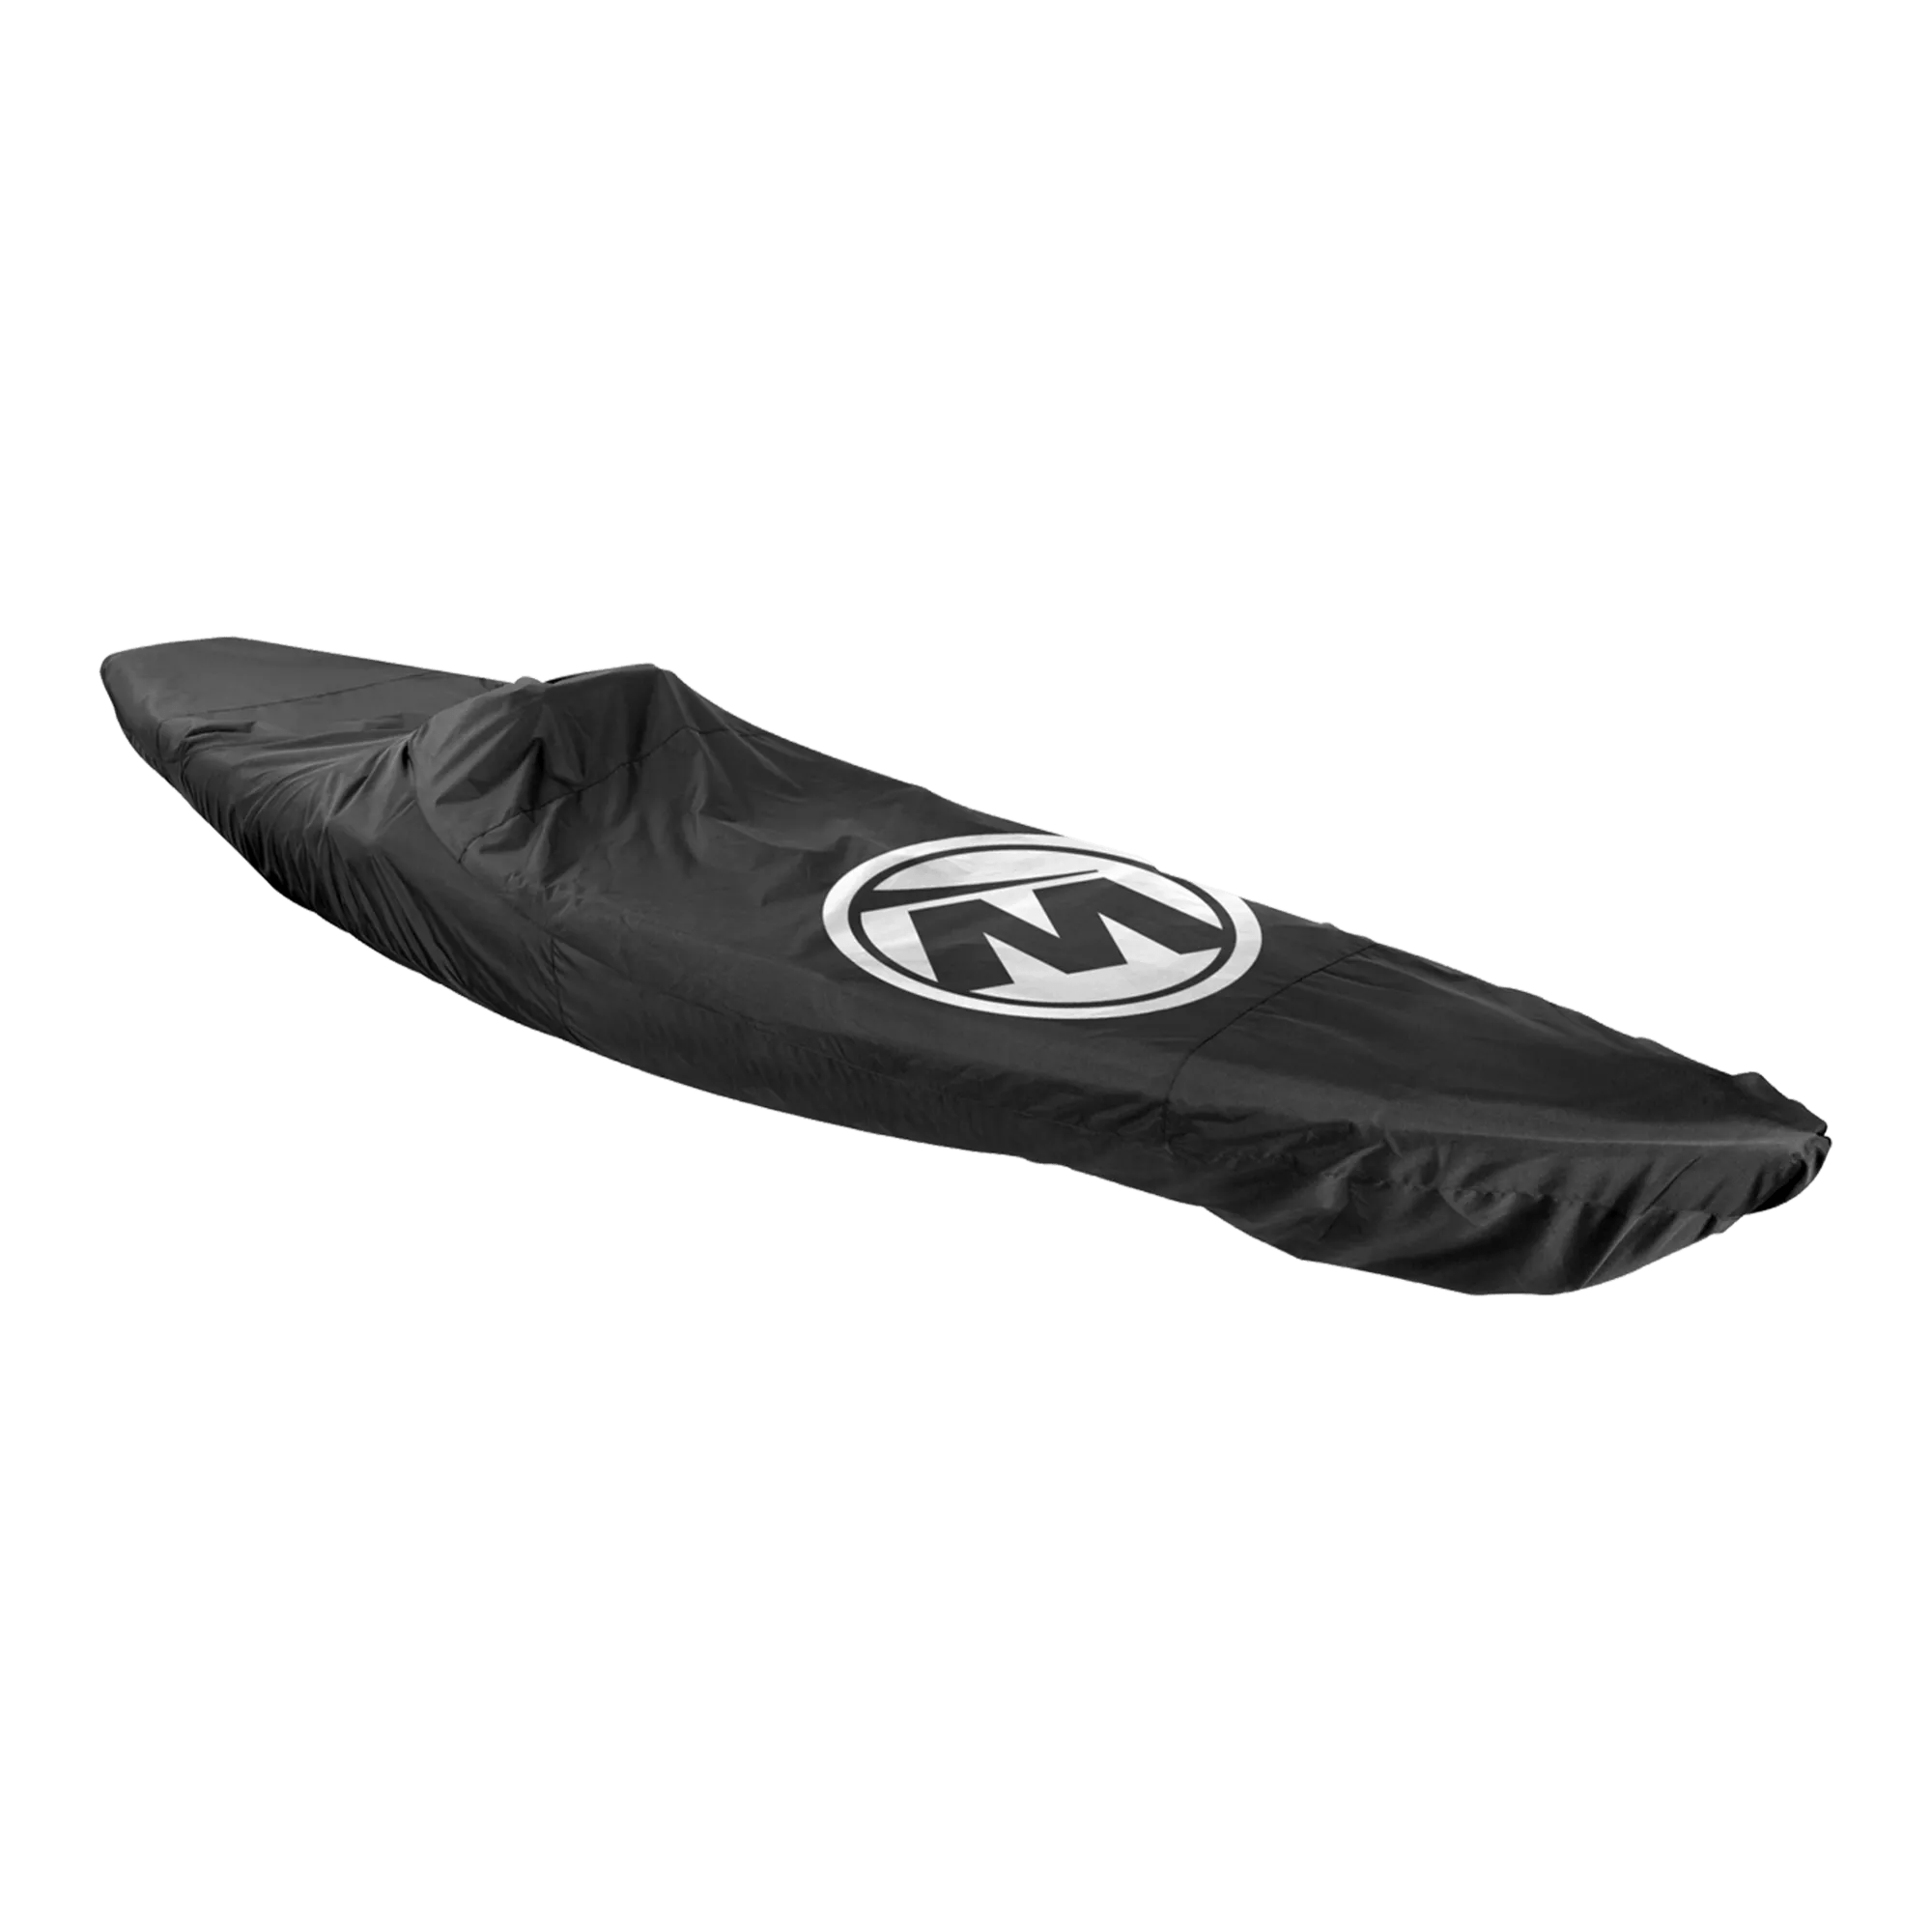 WILDERNESS SYSTEMS - Heavy-Duty Cover for SOT Kayaks - MD - Black - 8070232 - ISO 